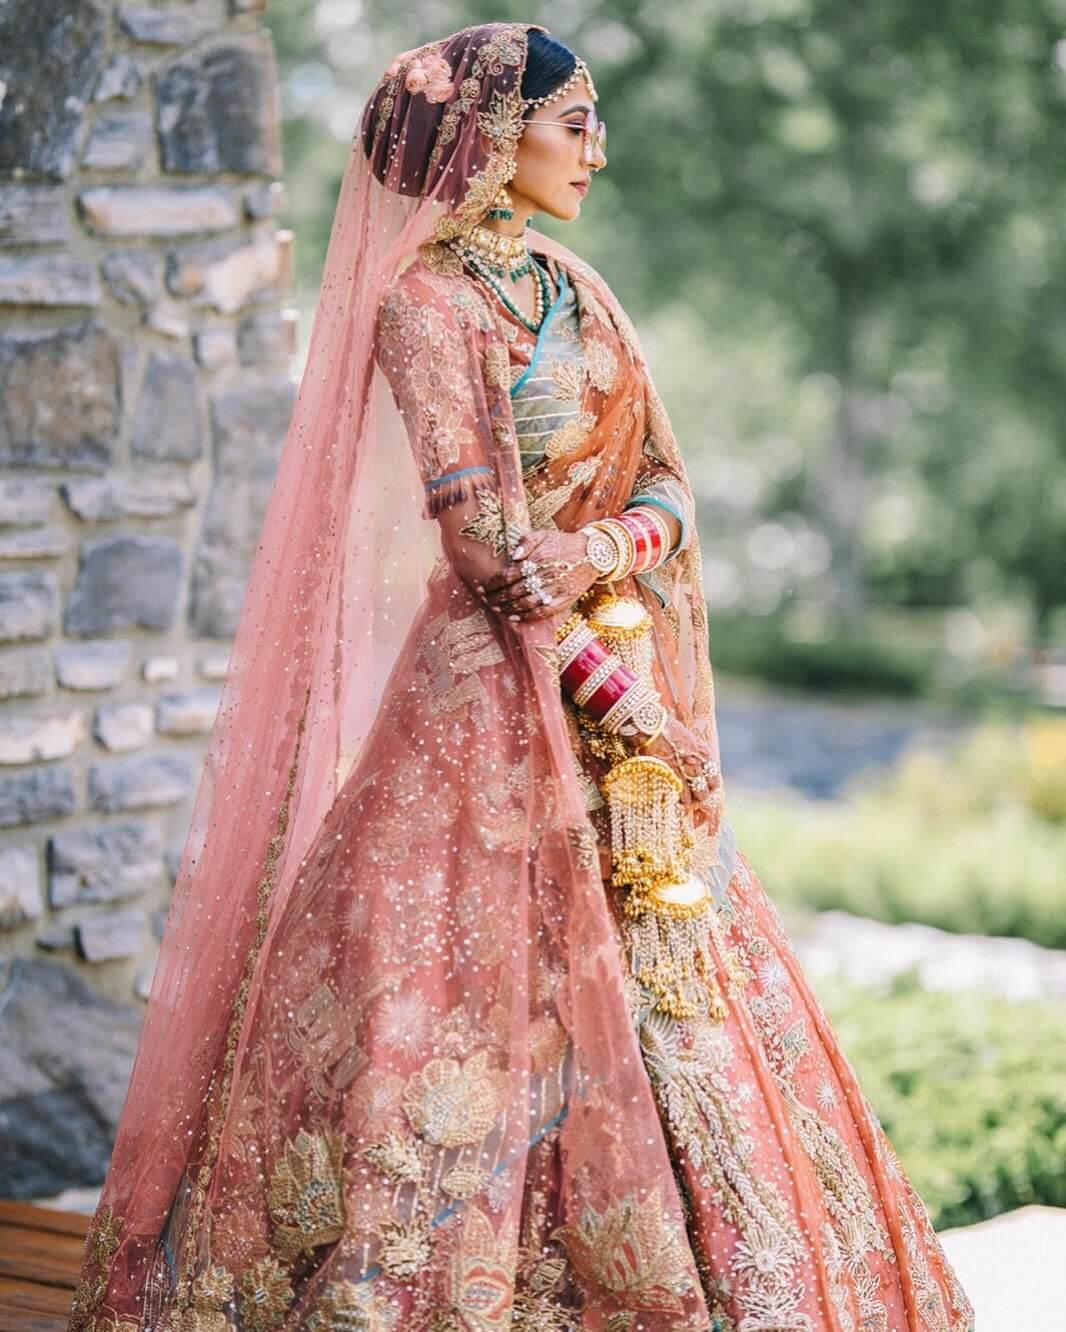 Latest Bridal Lehenga Color Combinations That Are Going To Rule 2020,Wedding Room Furniture Design In Pakistan